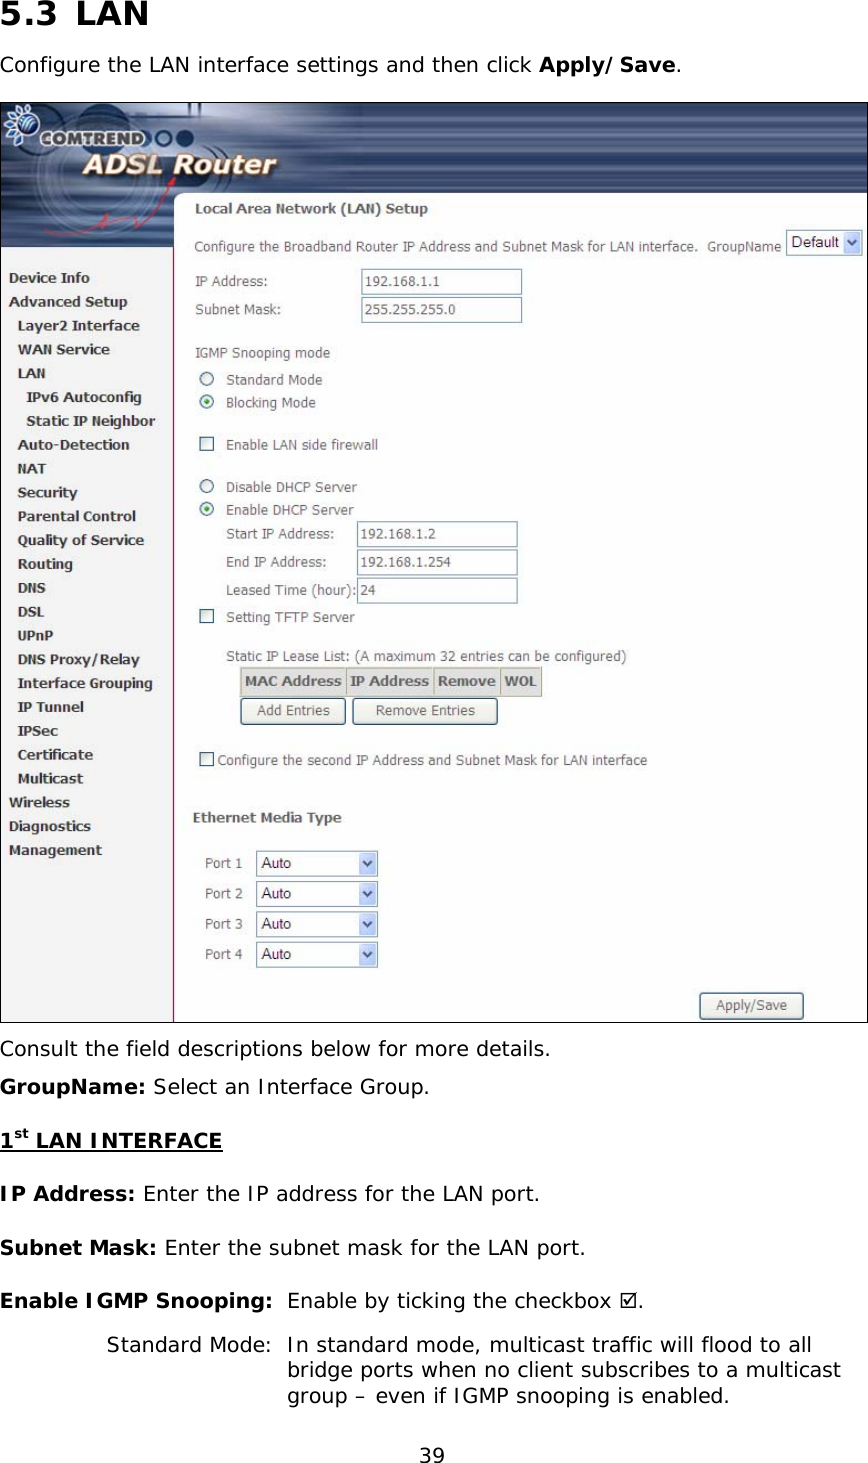  39  5.3 LAN Configure the LAN interface settings and then click Apply/Save.   Consult the field descriptions below for more details. GroupName: Select an Interface Group. 1st LAN INTERFACE IP Address: Enter the IP address for the LAN port. Subnet Mask: Enter the subnet mask for the LAN port. Enable IGMP Snooping:  Enable by ticking the checkbox .   Standard Mode:  In standard mode, multicast traffic will flood to all      bridge ports when no client subscribes to a multicast      group – even if IGMP snooping is enabled. 